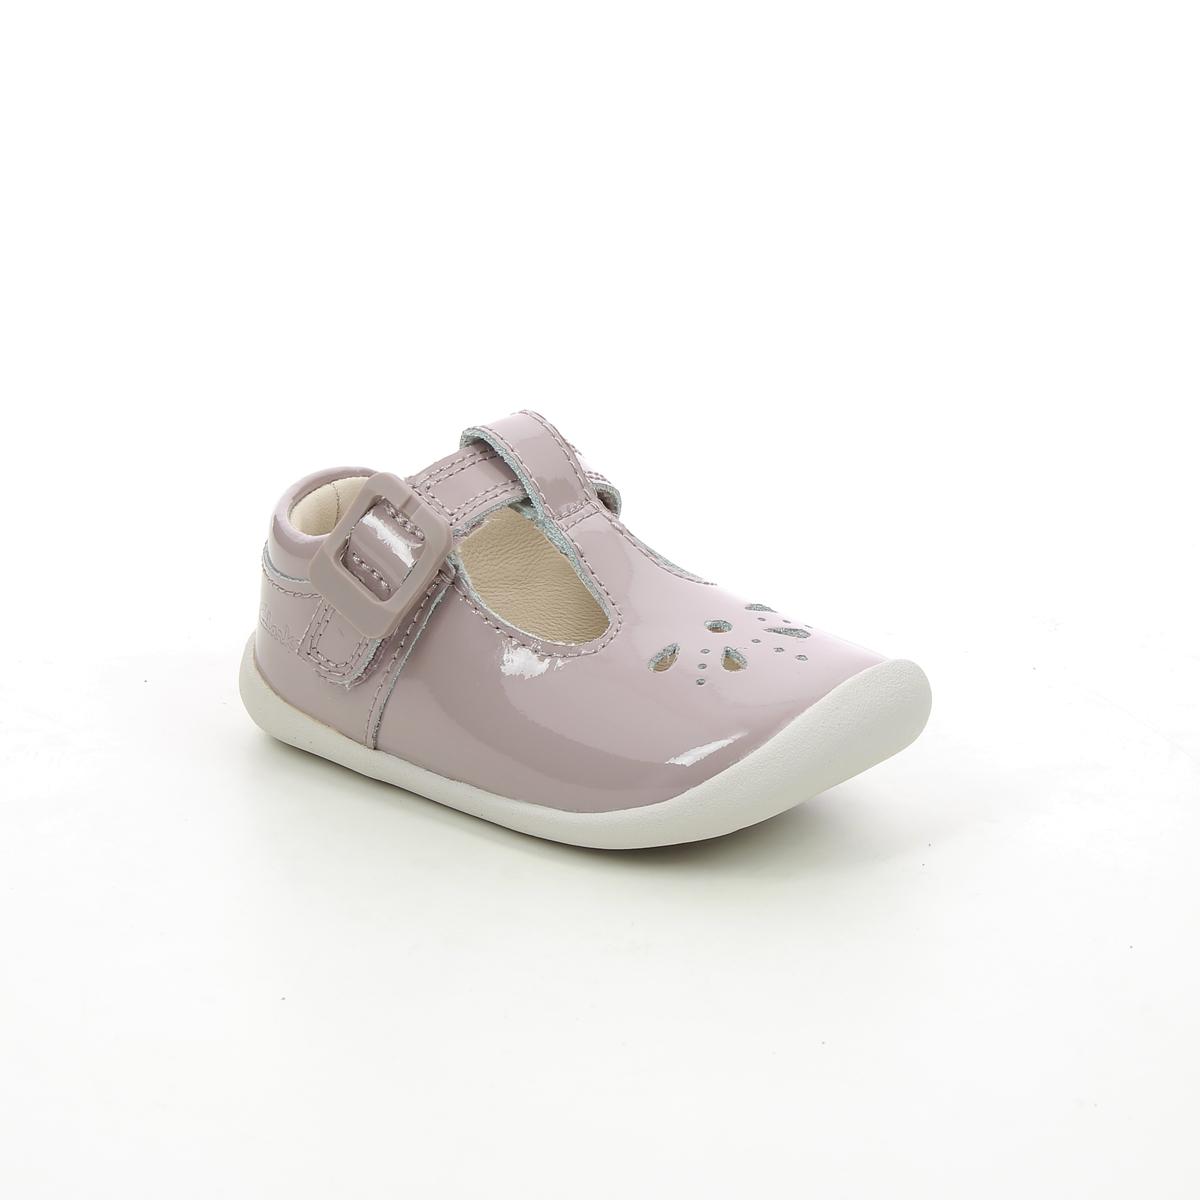 Clarks Roamer Star T H Fit first and baby shoes